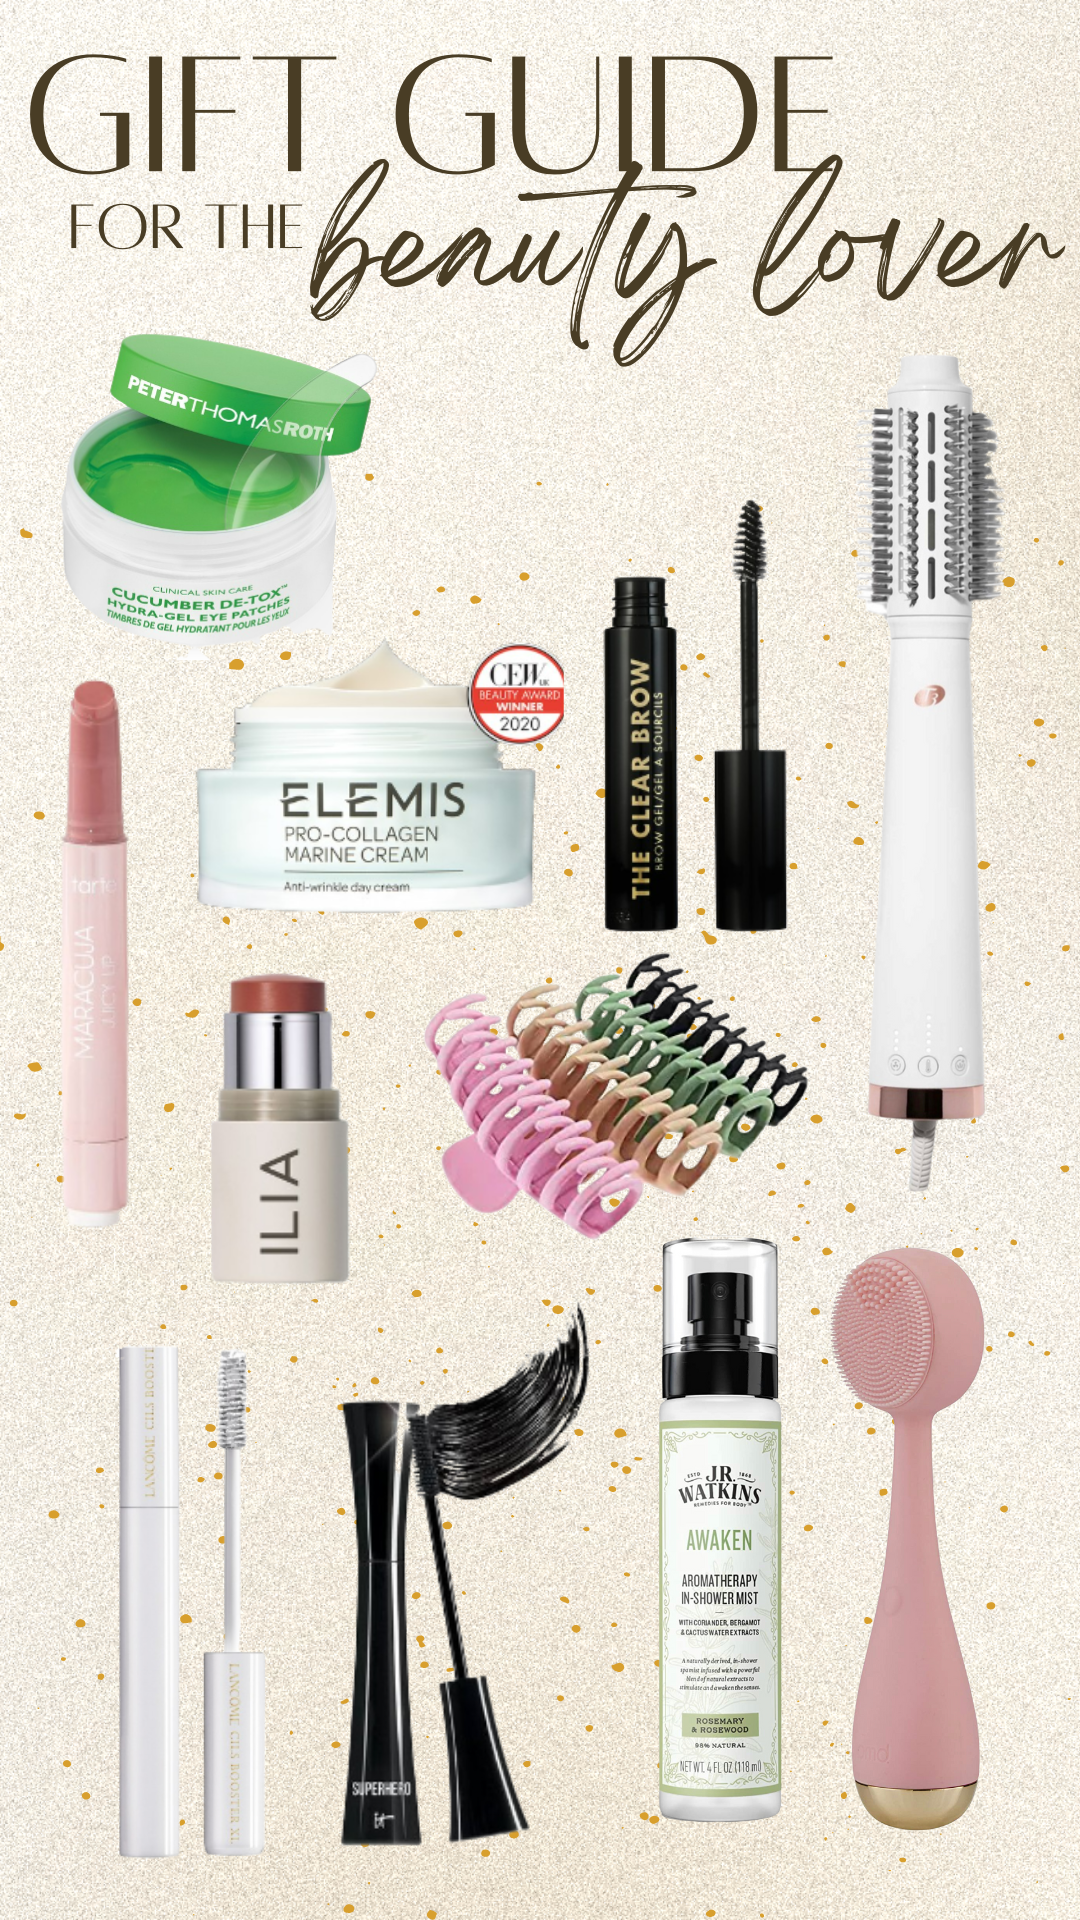 Holiday Gift Guide-Jacyln De Leon Style. Holiday gift guide for the beauty lover. Holiday gifting for beauty lovers.